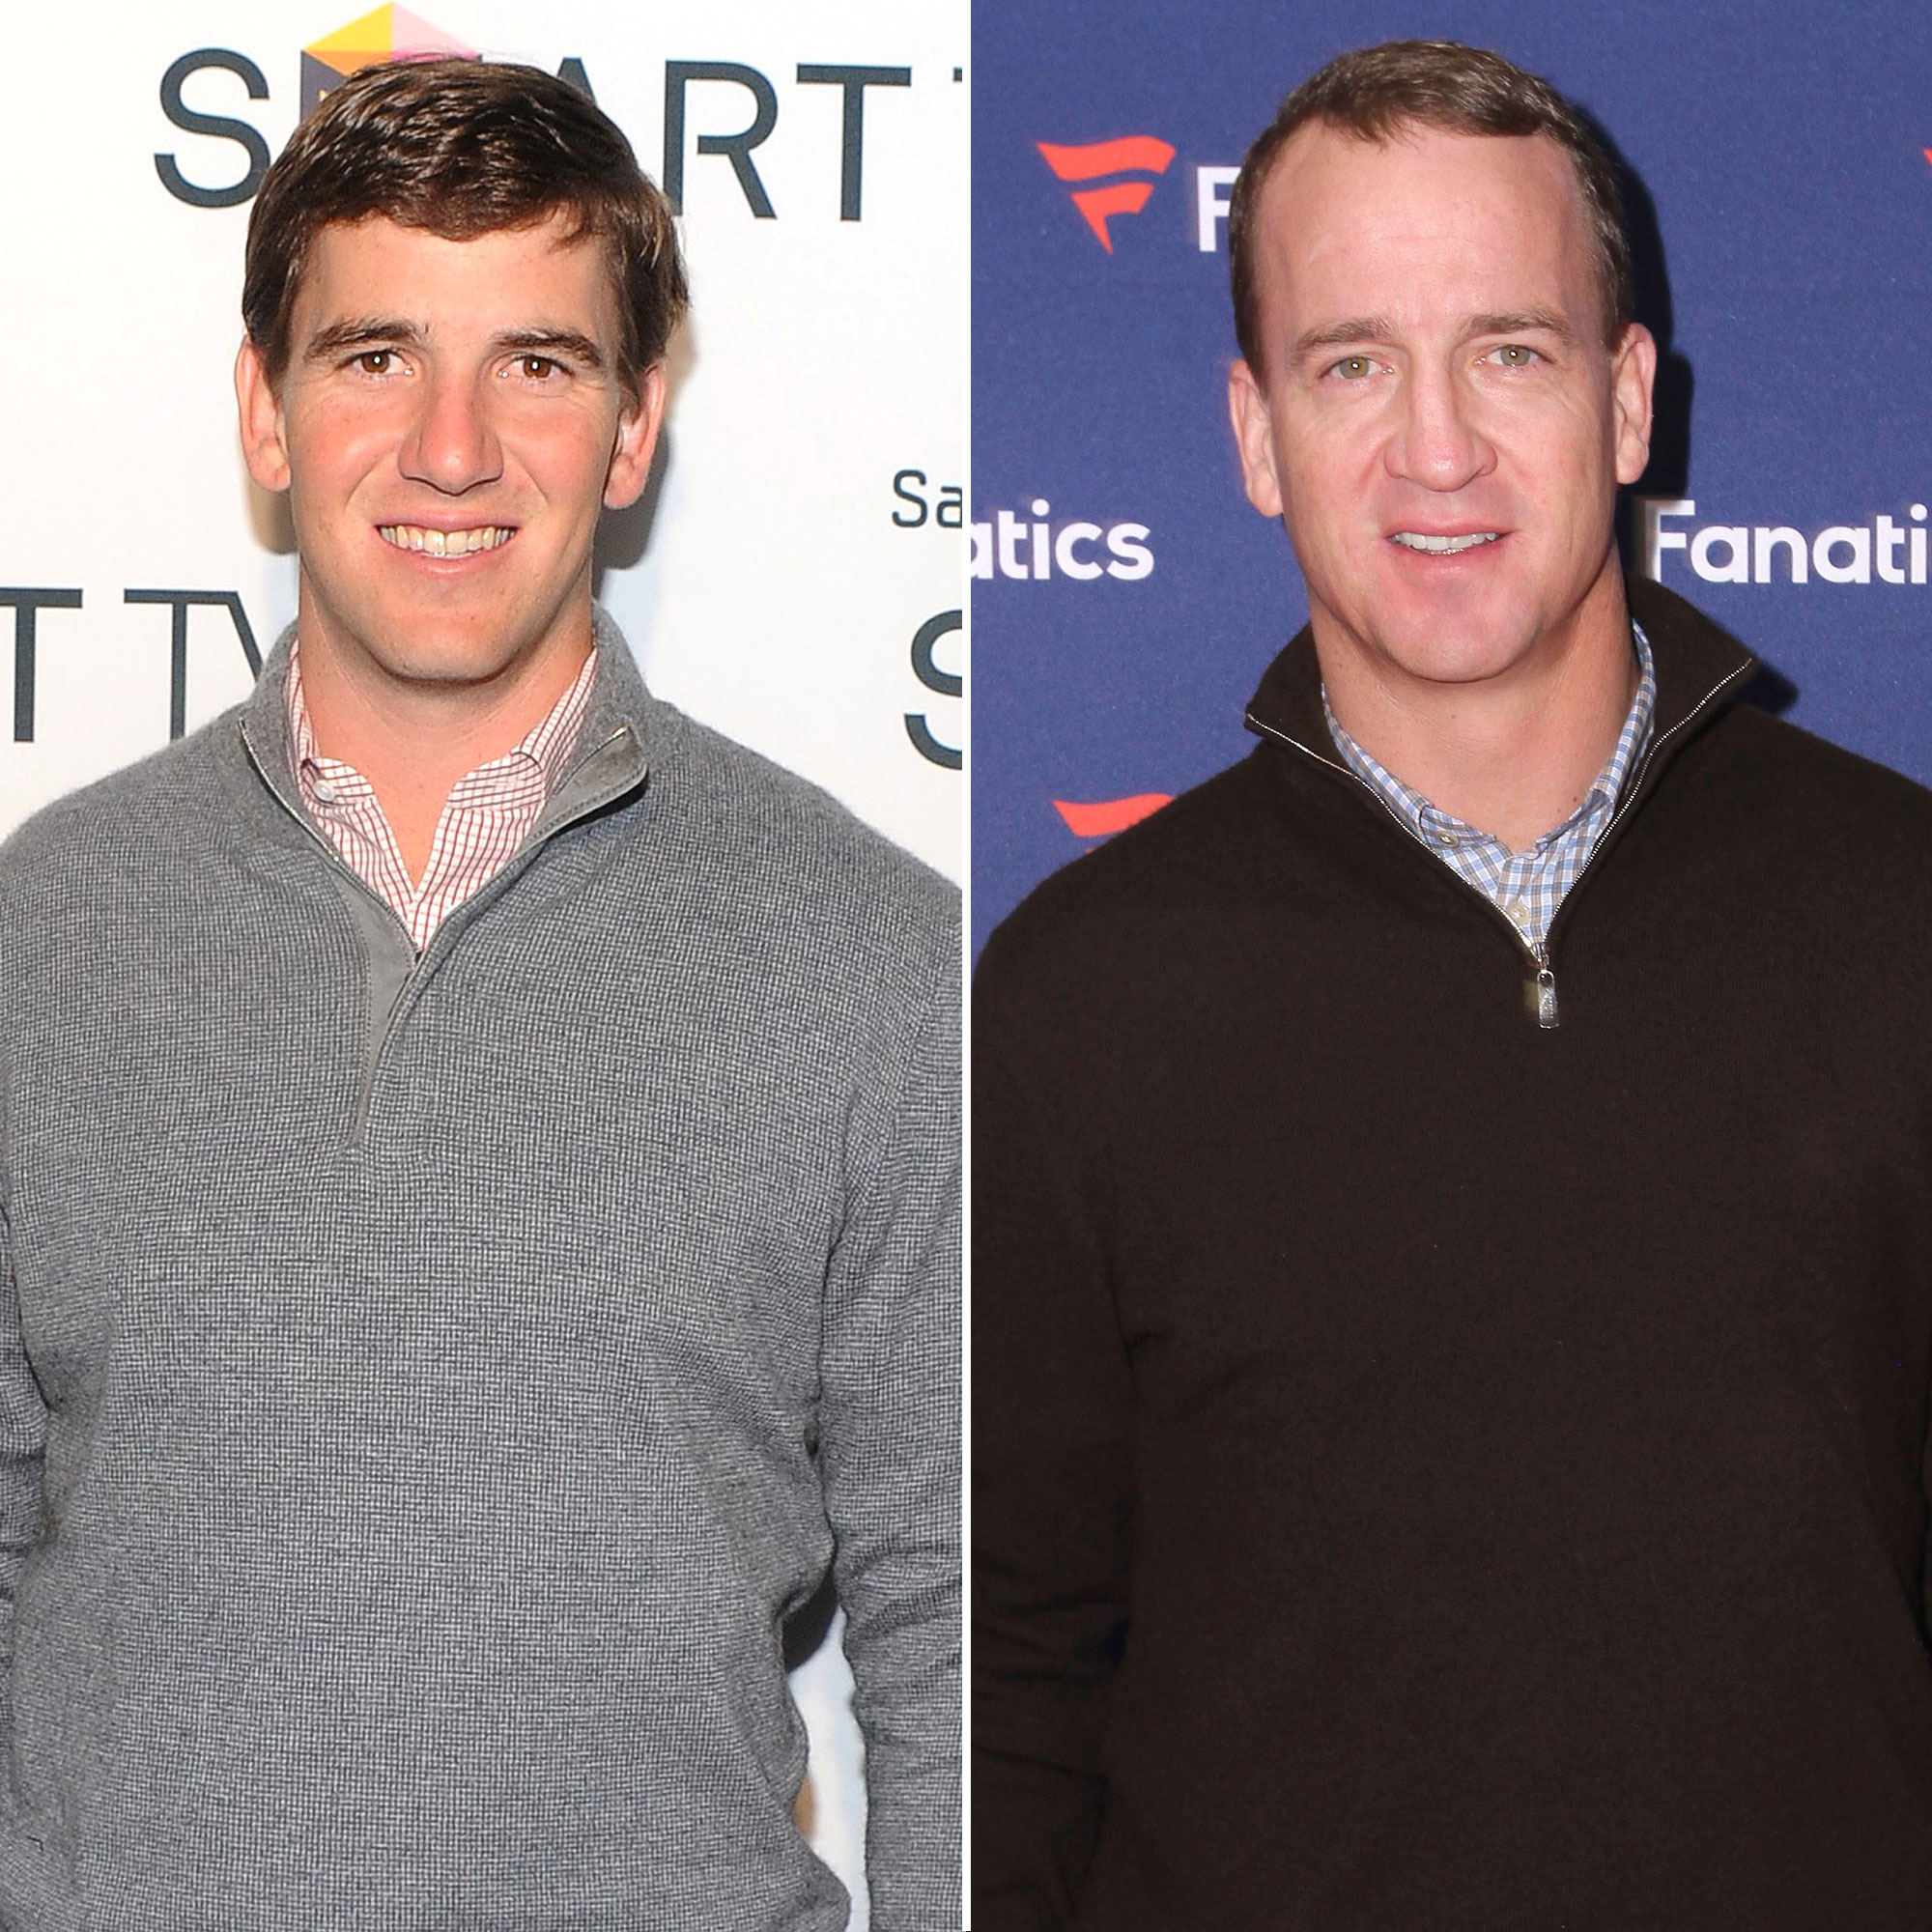 The Manning Brothers: All About Peyton, Eli and Cooper